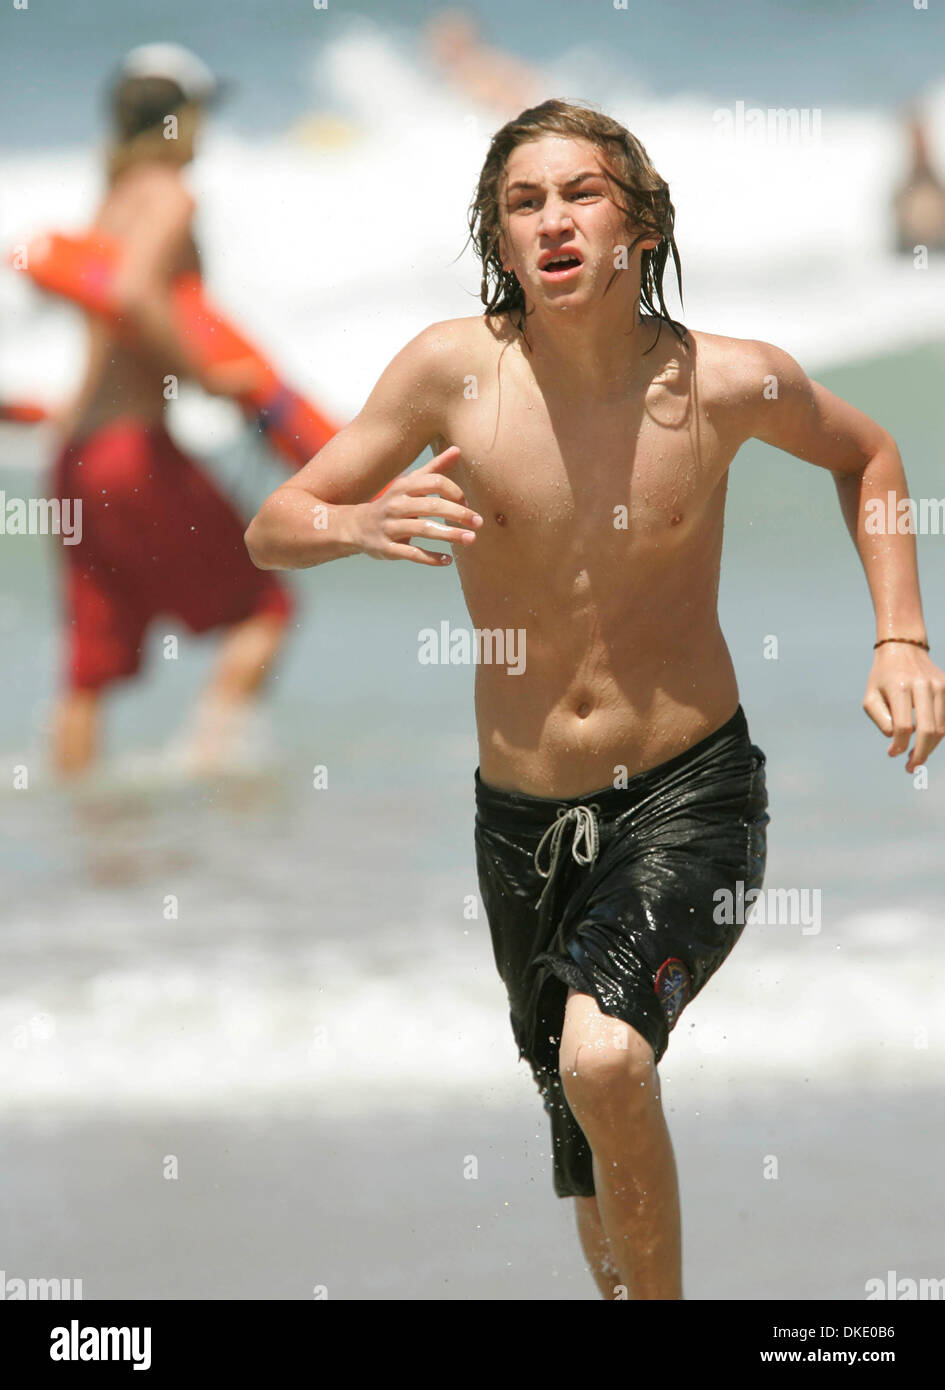 Jun 19, 2007 - Encinitas, California, USA - MASON LEVY, (13-from Carlsbad)  raced from the water during a relay race at Moonlight Beach in Encinitas He  was one of the kids taking